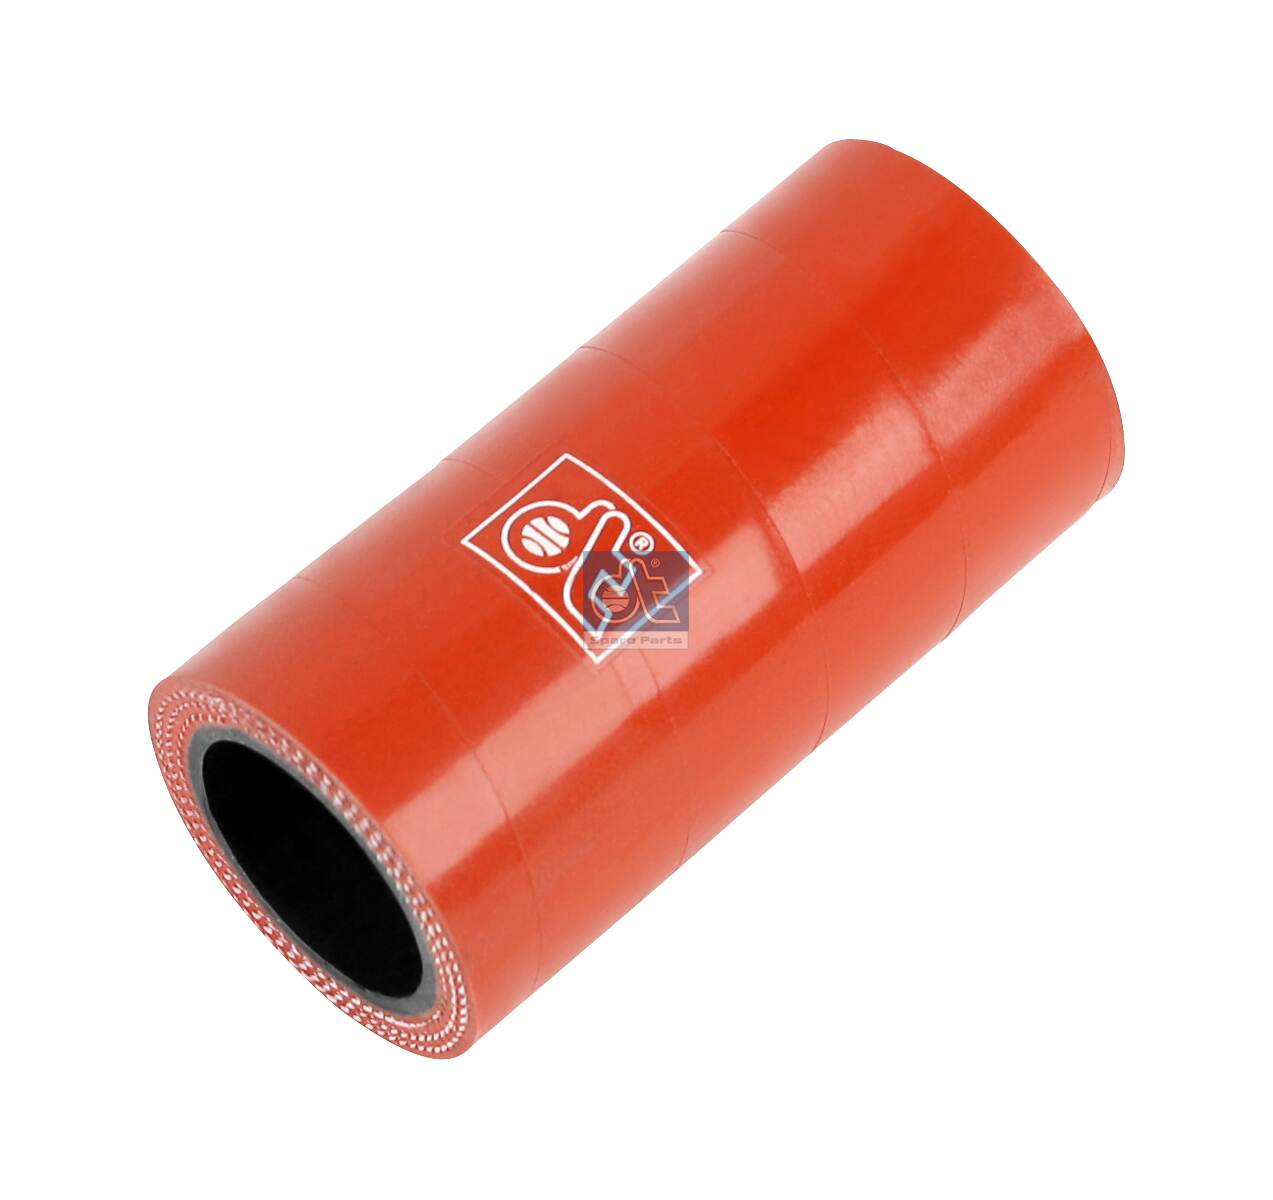 3.19051, Charge Air Hose, DT Spare Parts, 07W103683, 51.96330.0187, 51.96330.0346, 020.416, 05.14.032, 56329, 6059, 750001, 6059.00, 51963300187, 51963300346